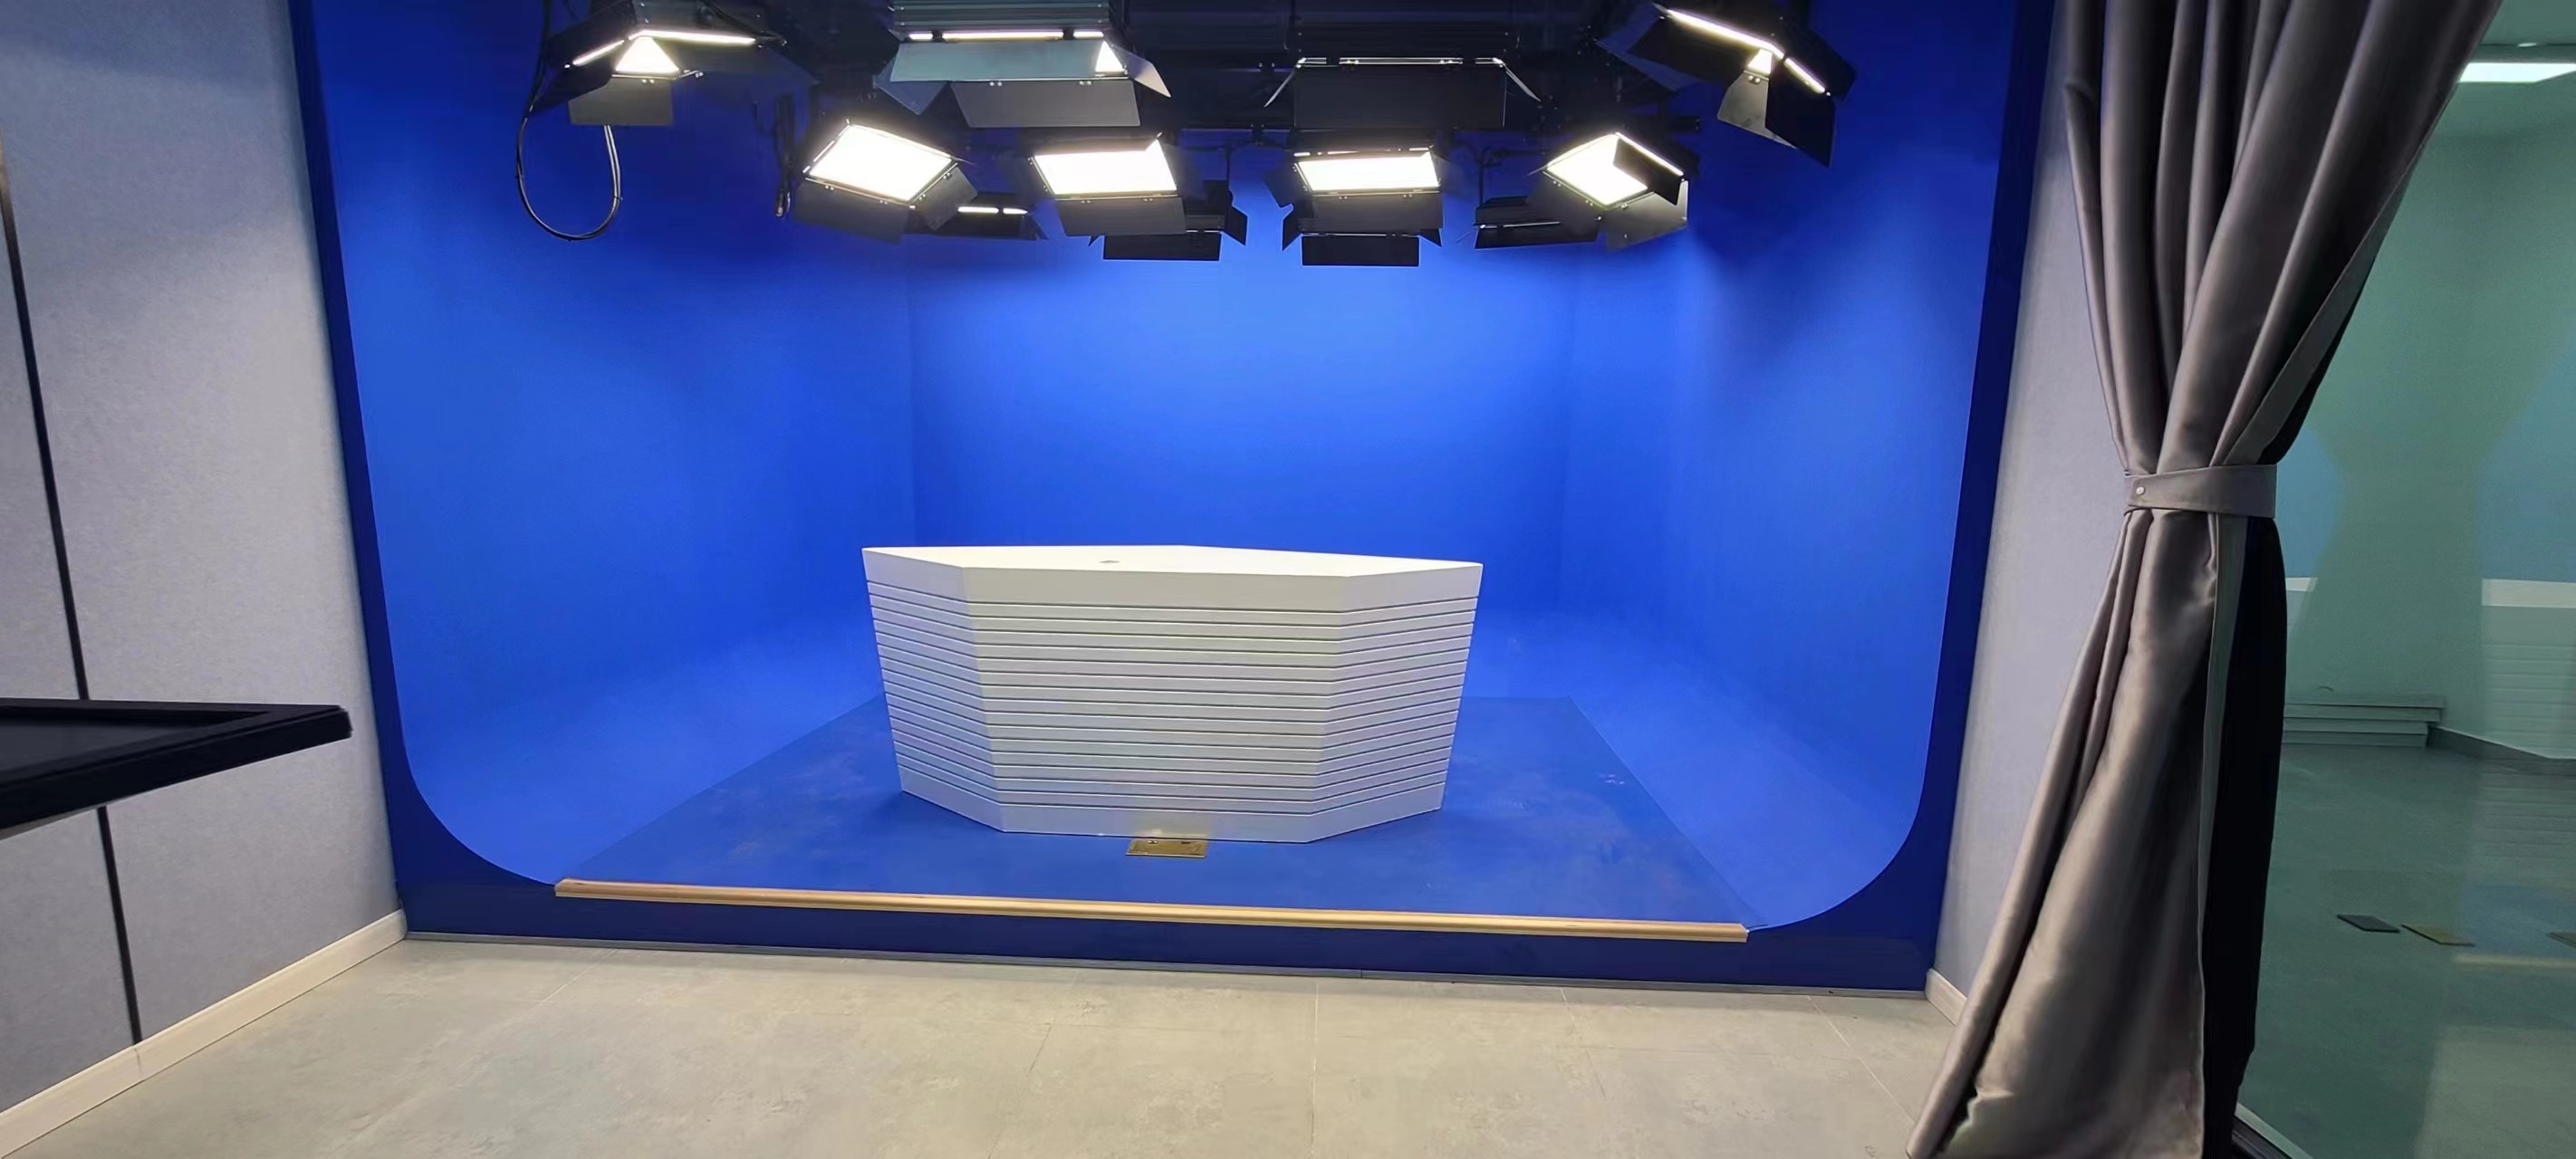 Construction of Virtual Studio for Campus TV Station: Camera Blue Box and Three Primary Colors of Light